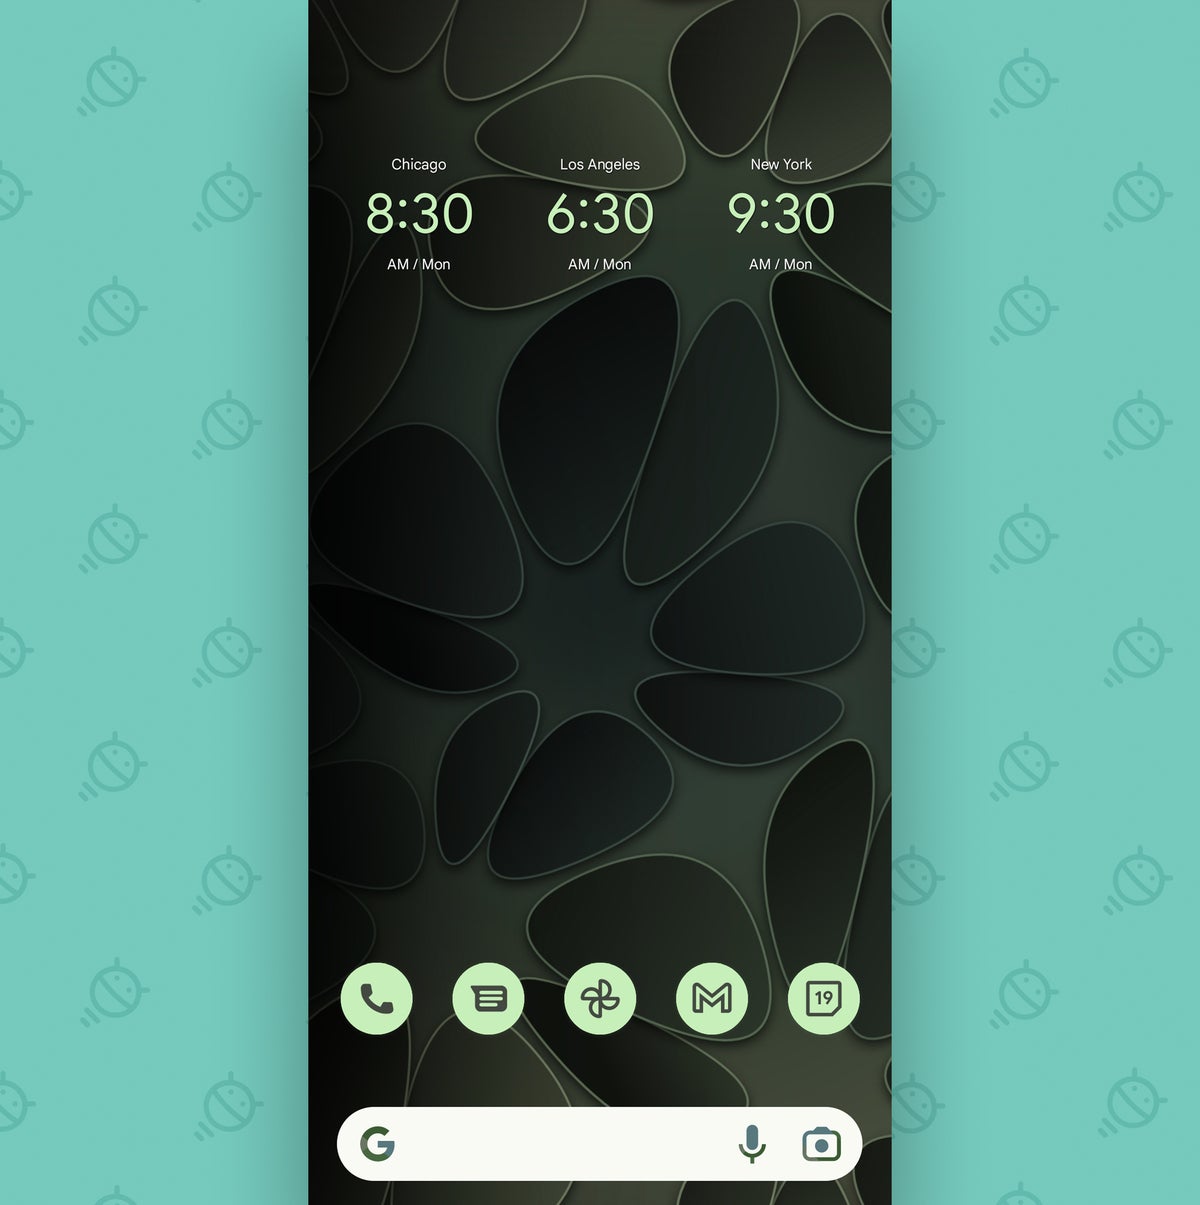 Android Design / Material You: Home screen